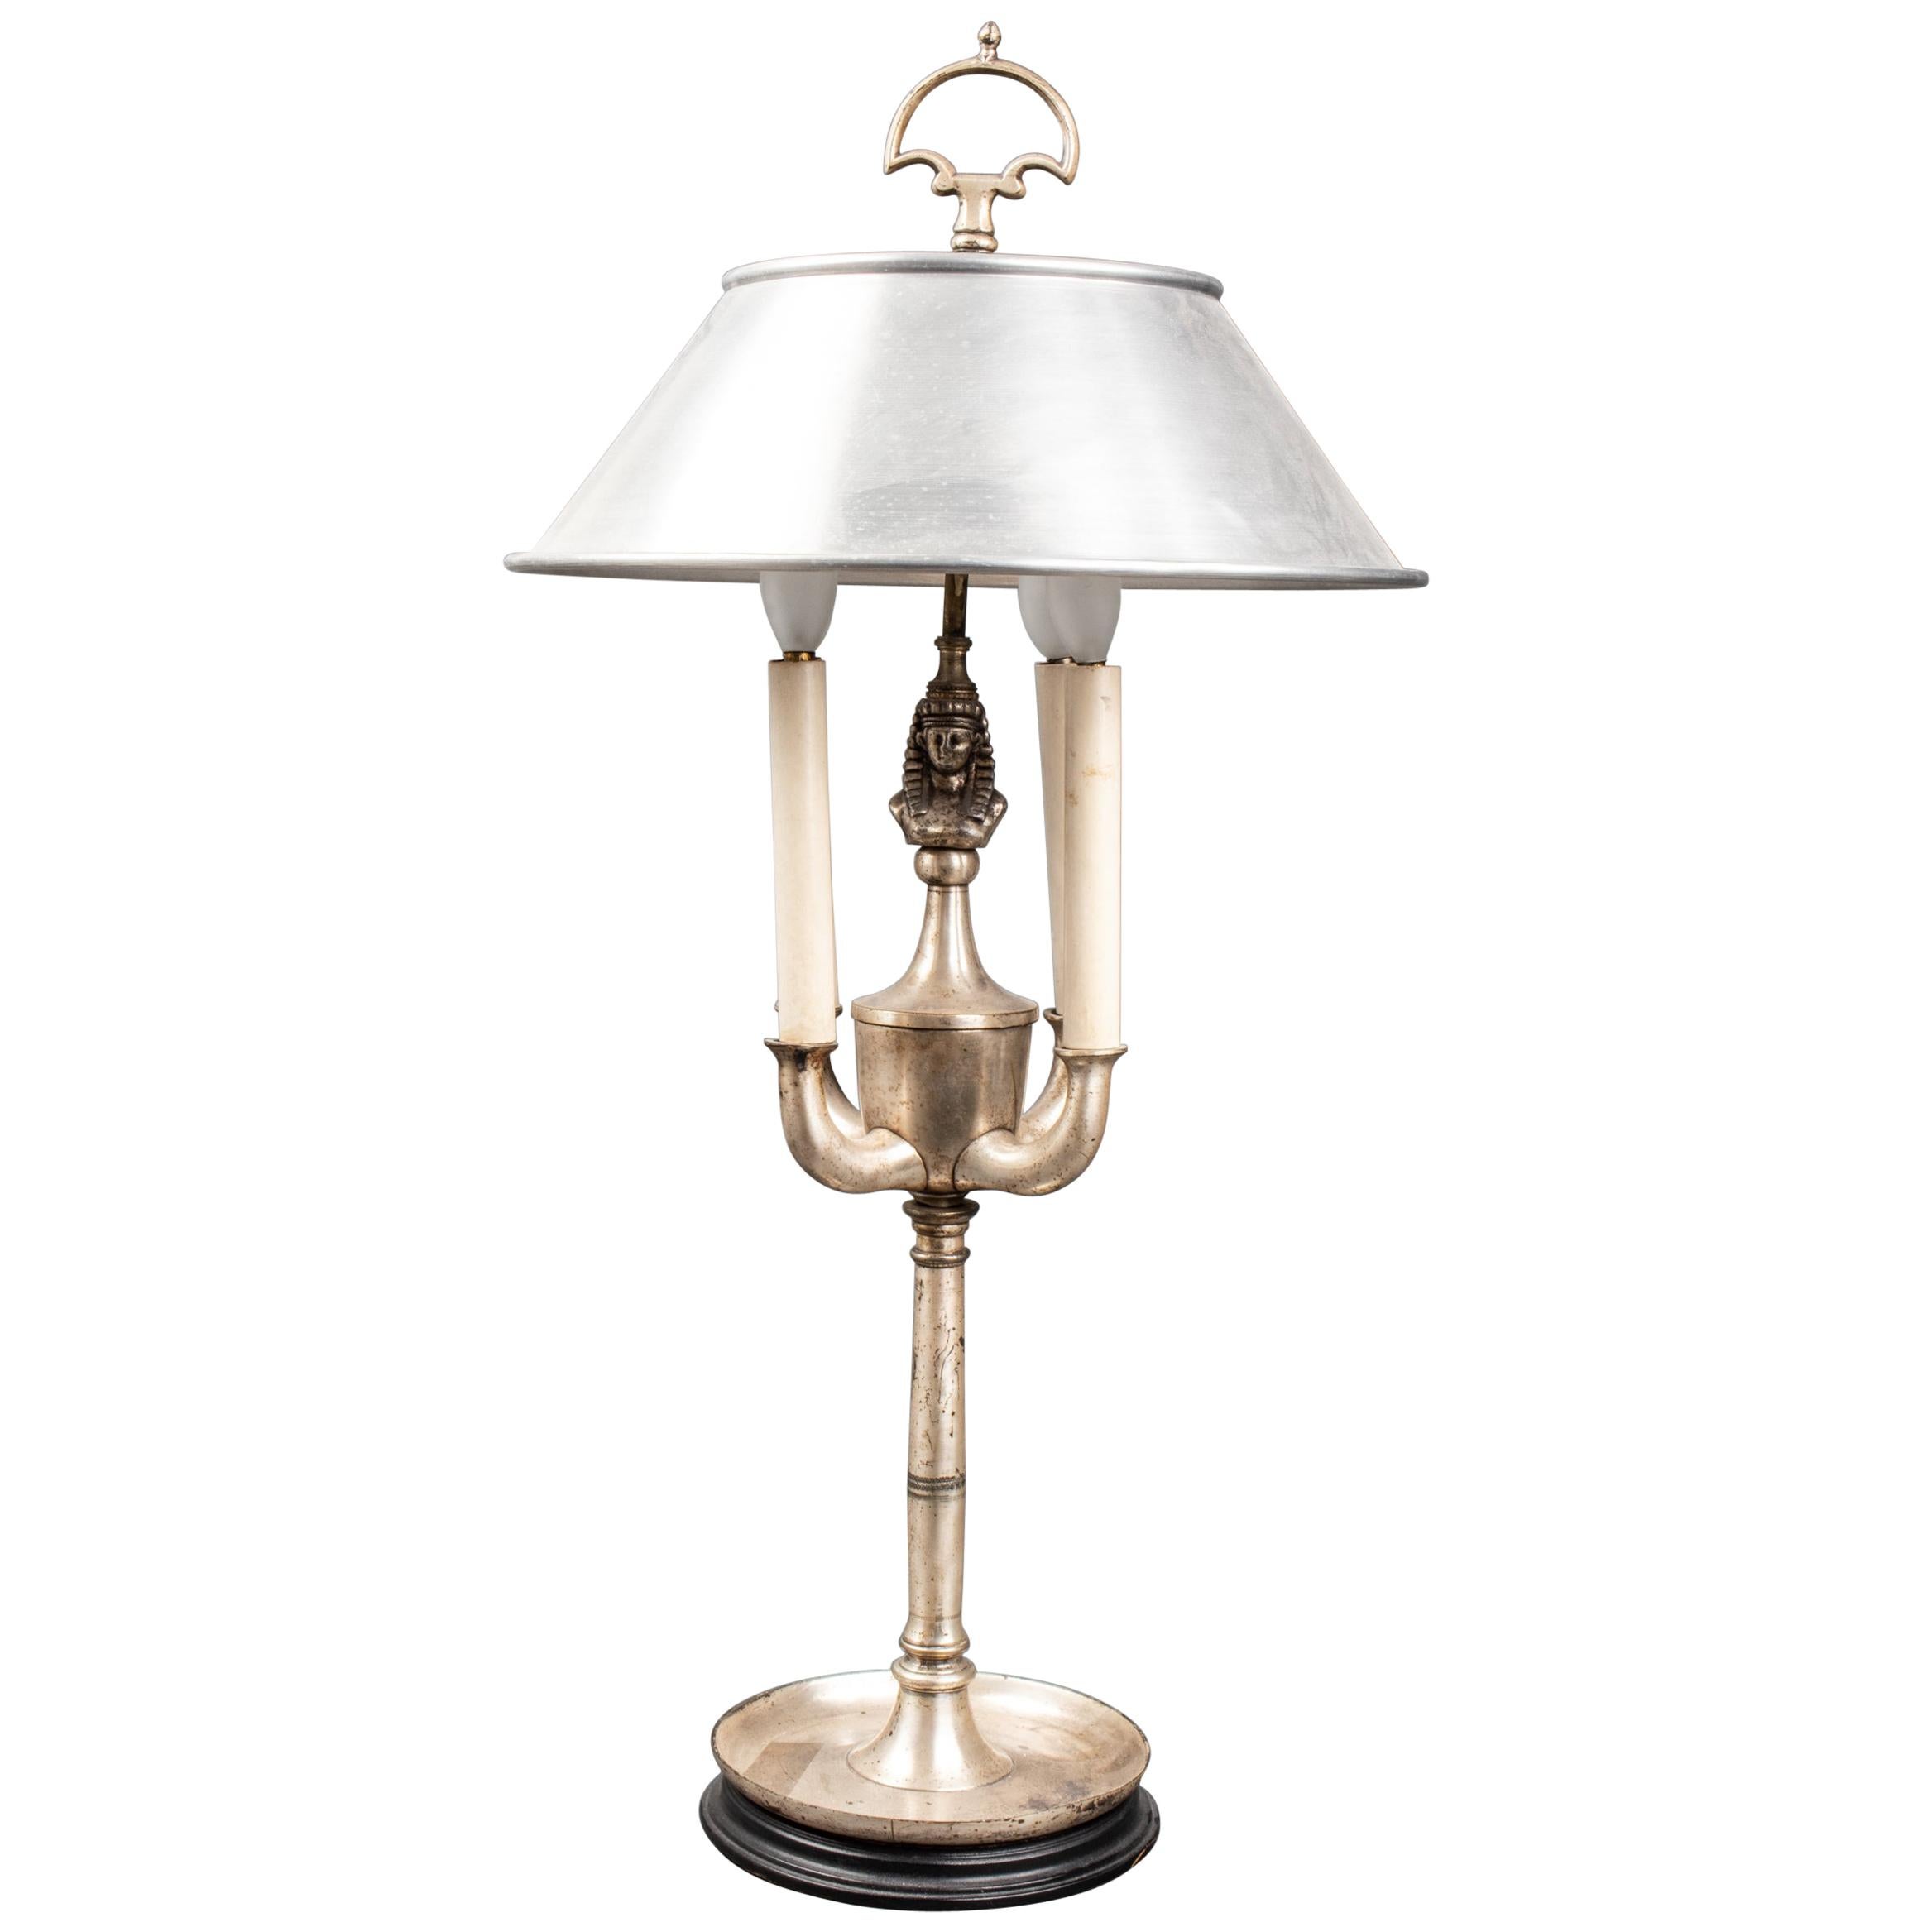 Egyptian Revival Style Table Lamp